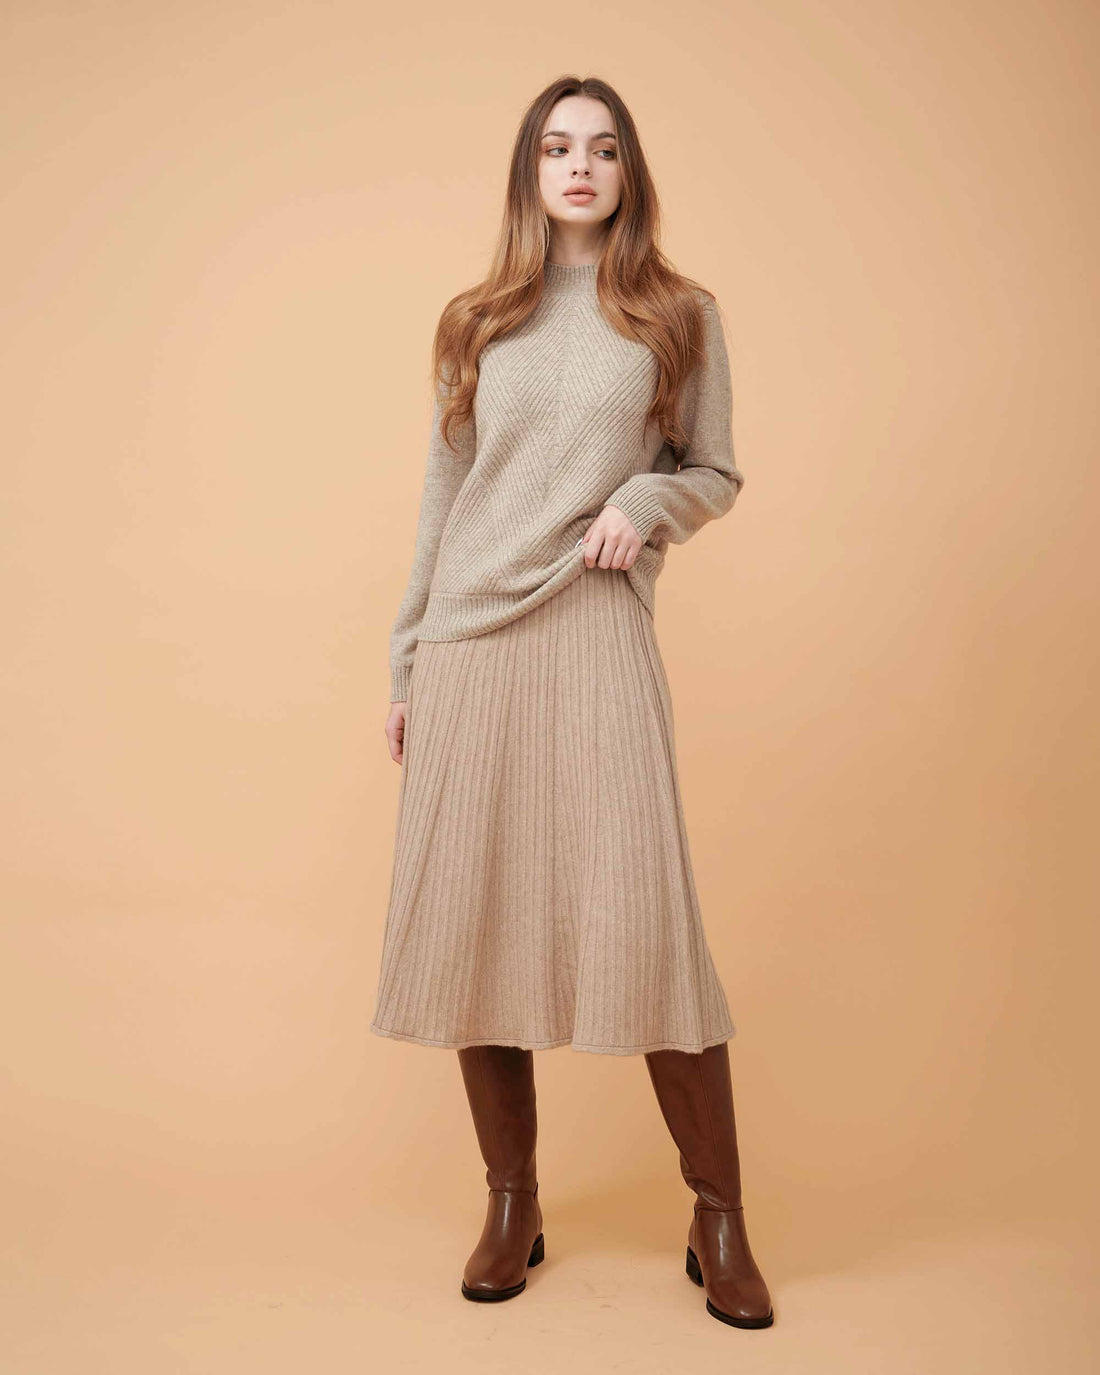 A woman wearing a tan cashmere midi skirt with pleats and a Cashmere sweater